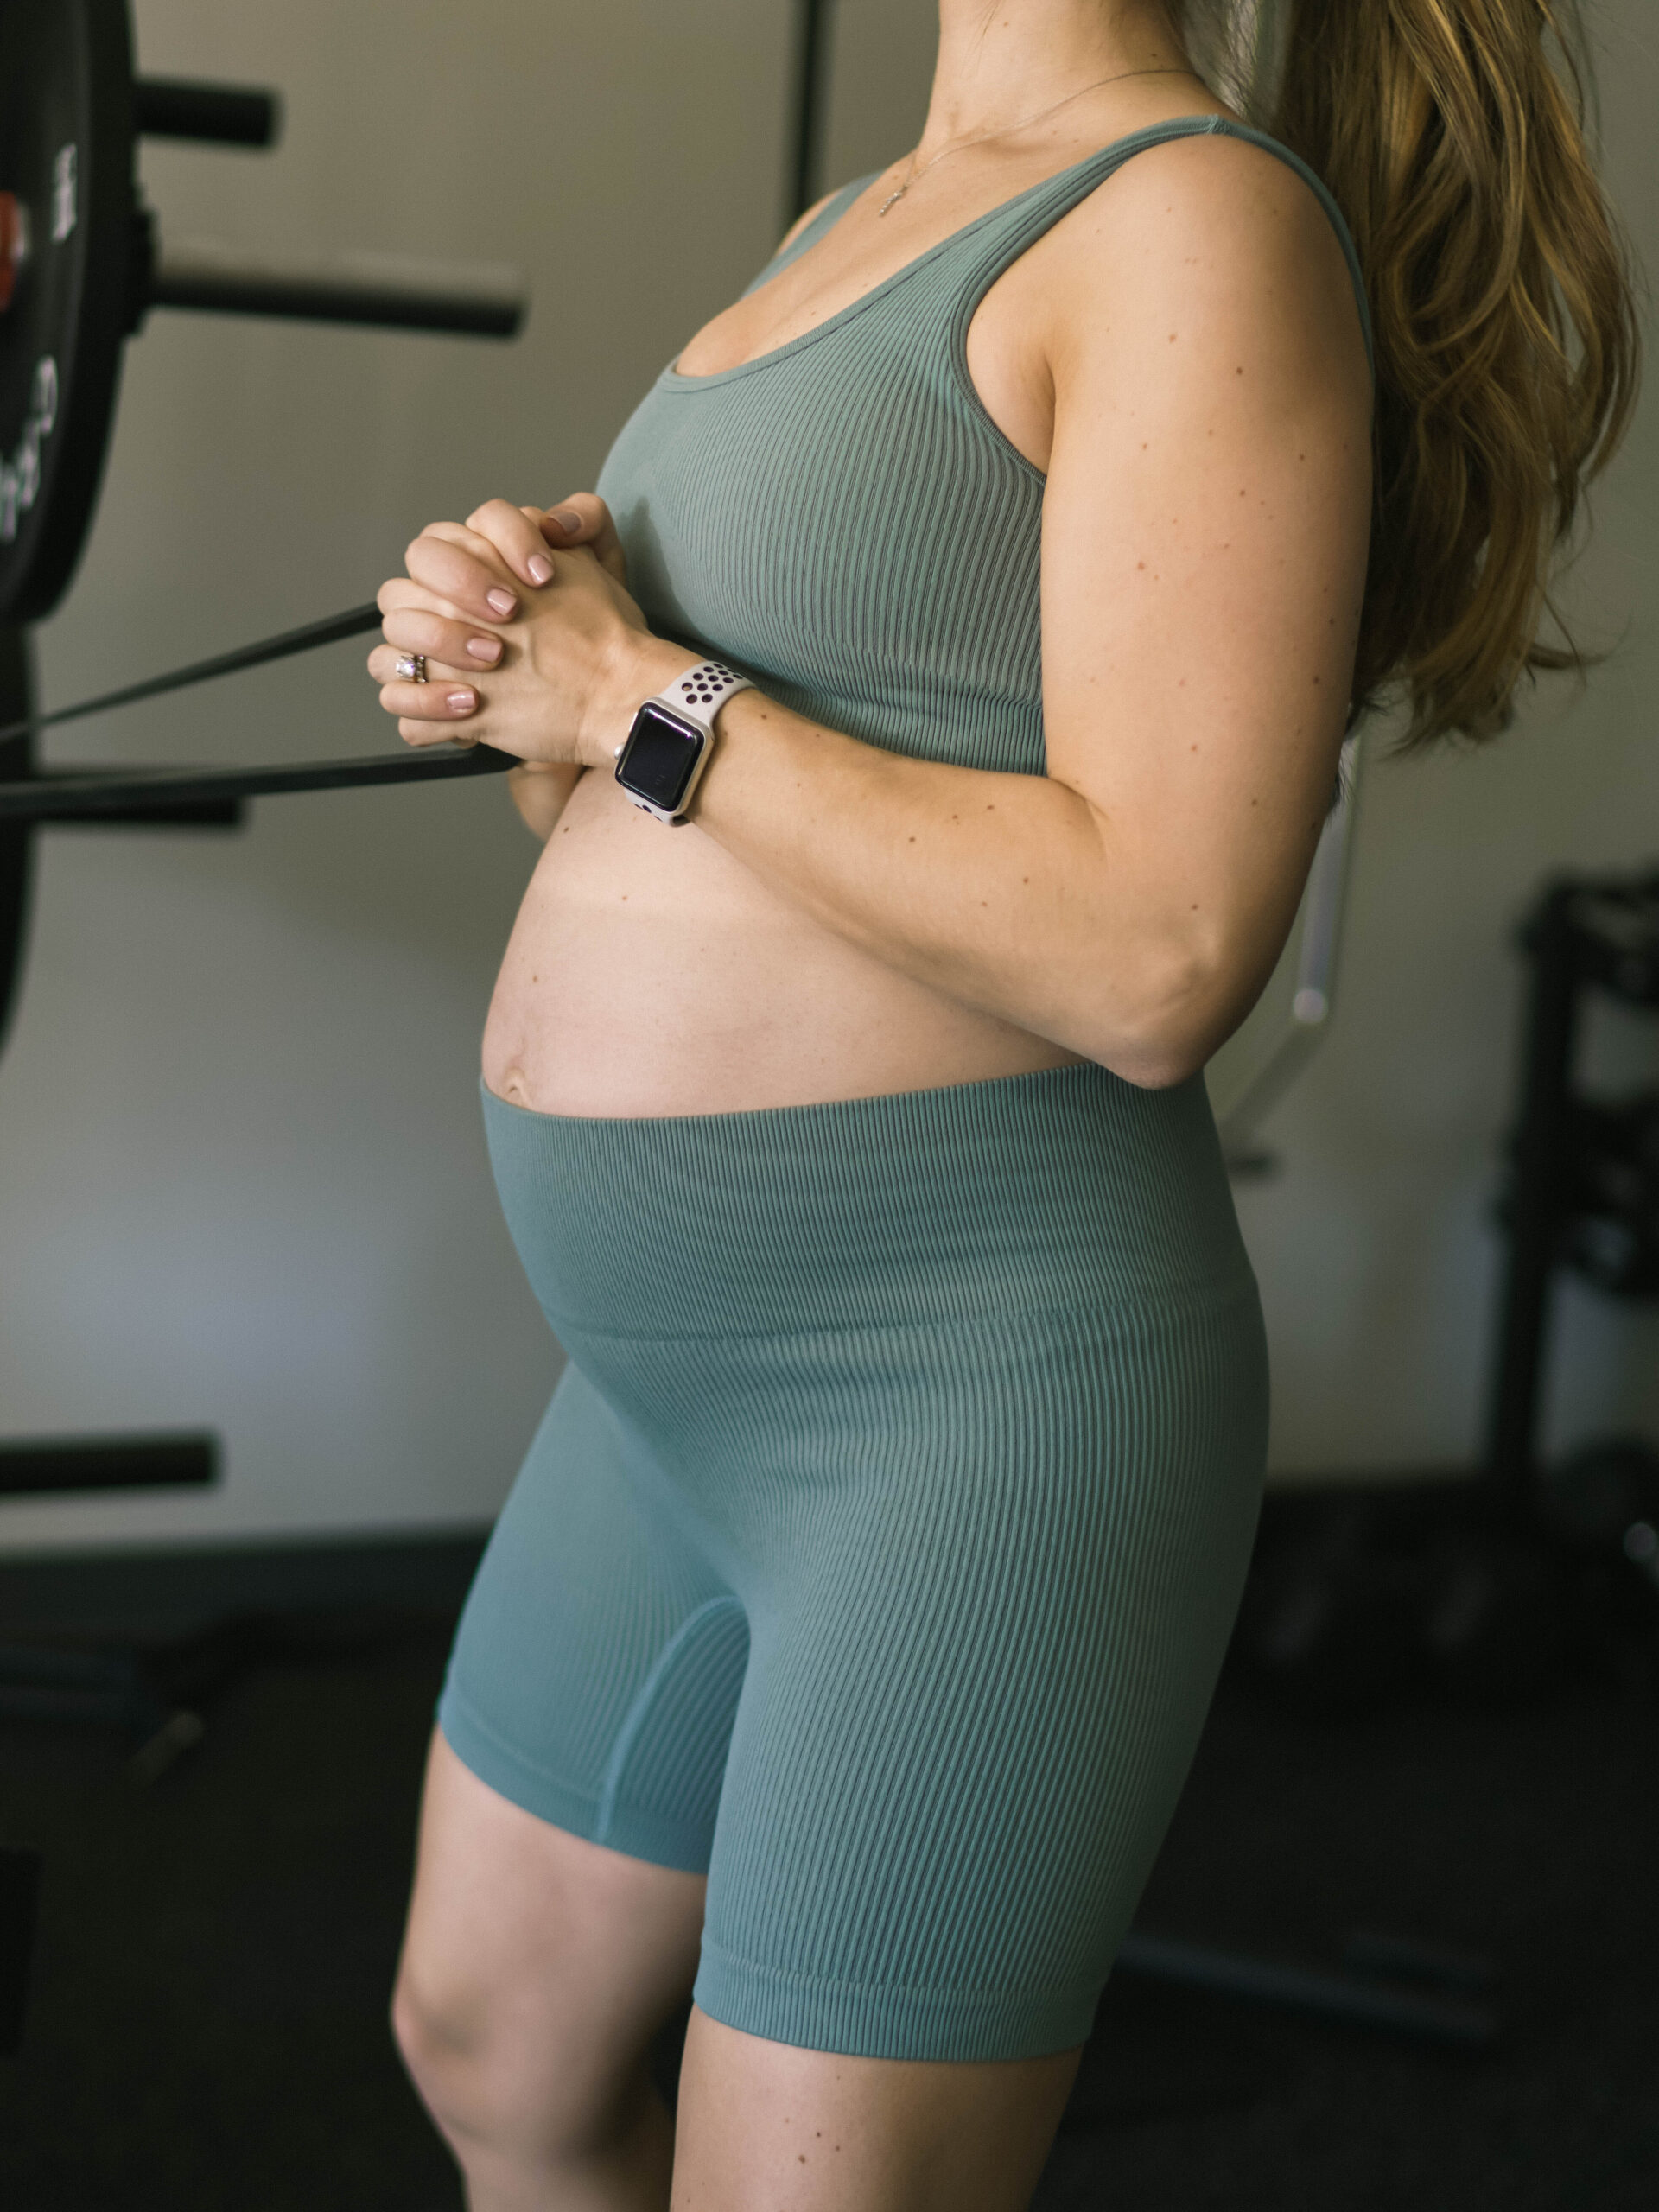 Pelvic Wellness During Pregnancy: Why it's Important & How to Improve It